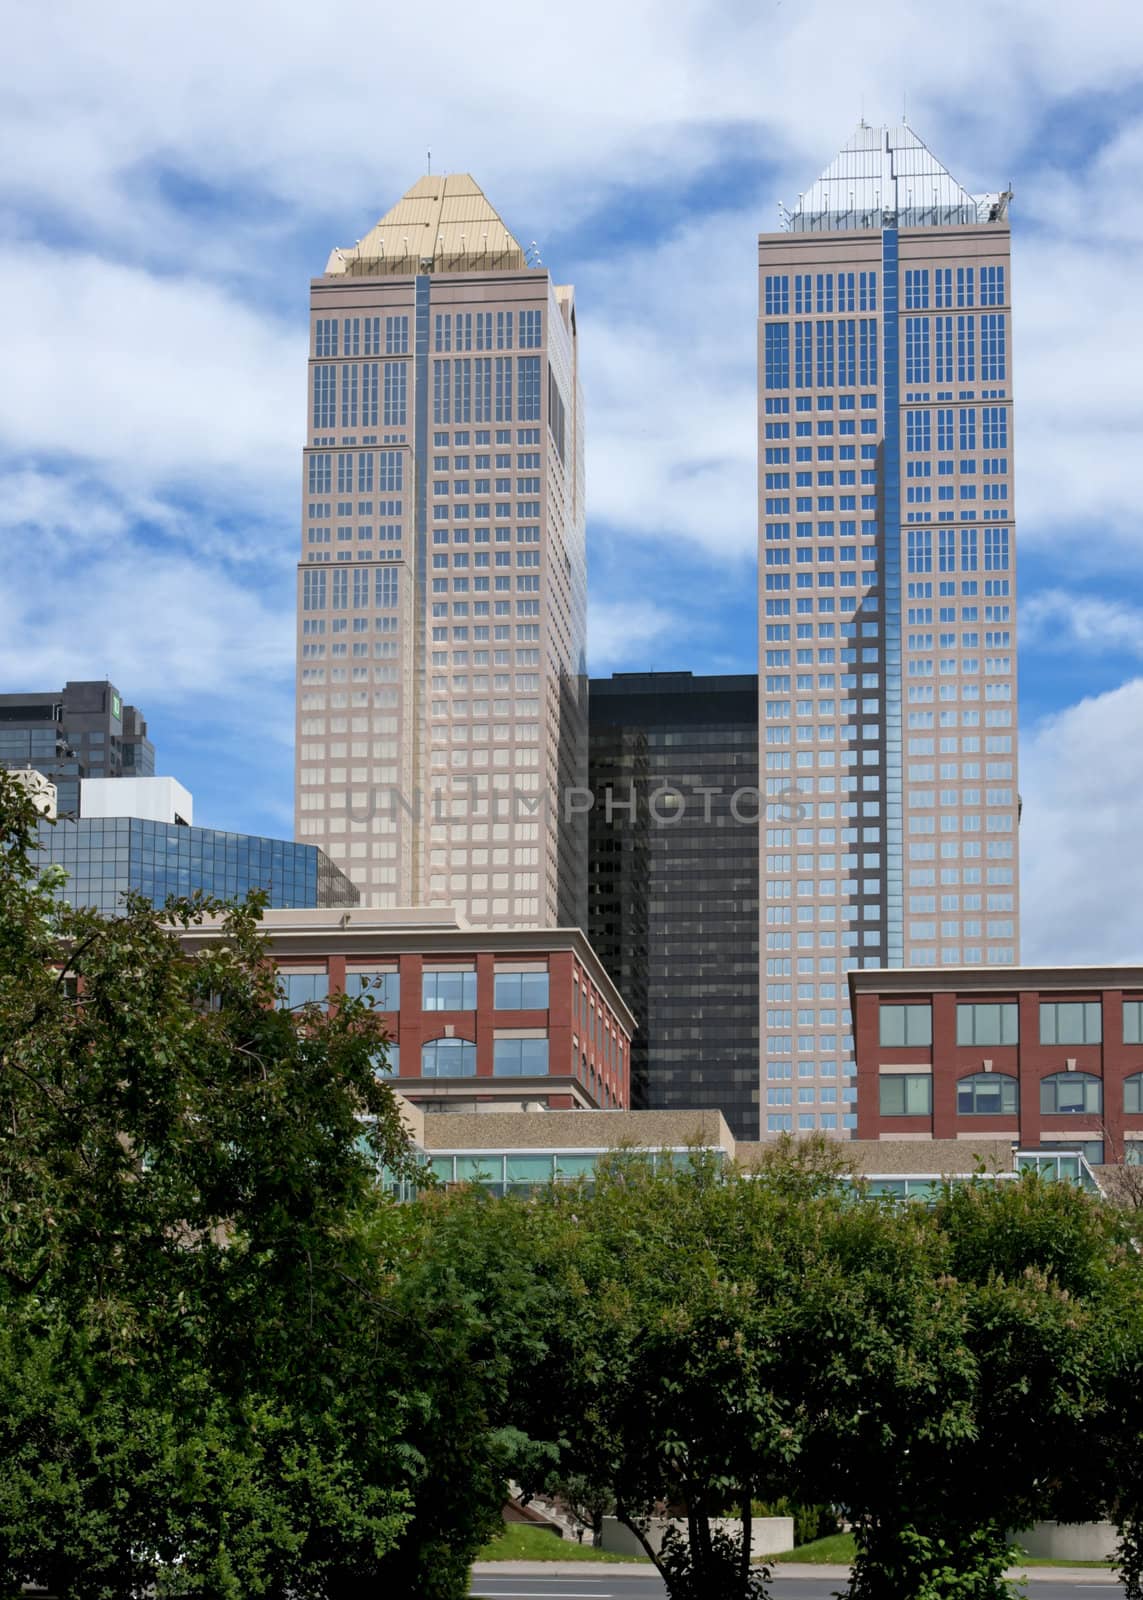 Two towers of 'Bankers Hall' rise in the sky.